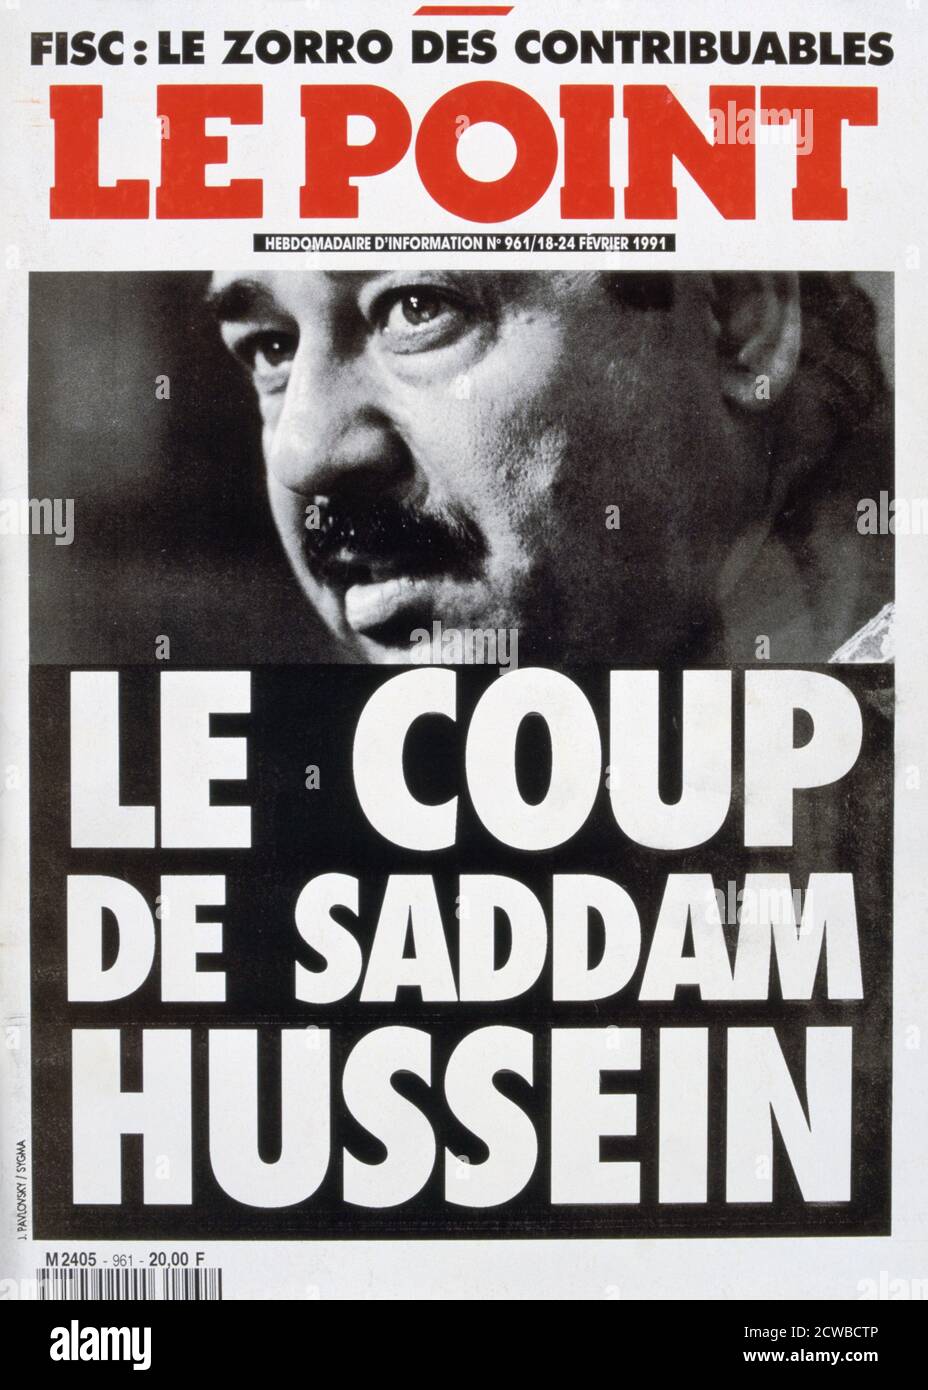 Front cover of Le Point, Febuary 1991. The artist is unknown. Le Point is a French weekly news magazine. The cover shows Iraqi dictator Saddam Hussein at the time of the First Gulf War. Rights information: Cleared for Editorial Use Only. Please Contact Us For Any Other Clearance Rights. Stock Photo